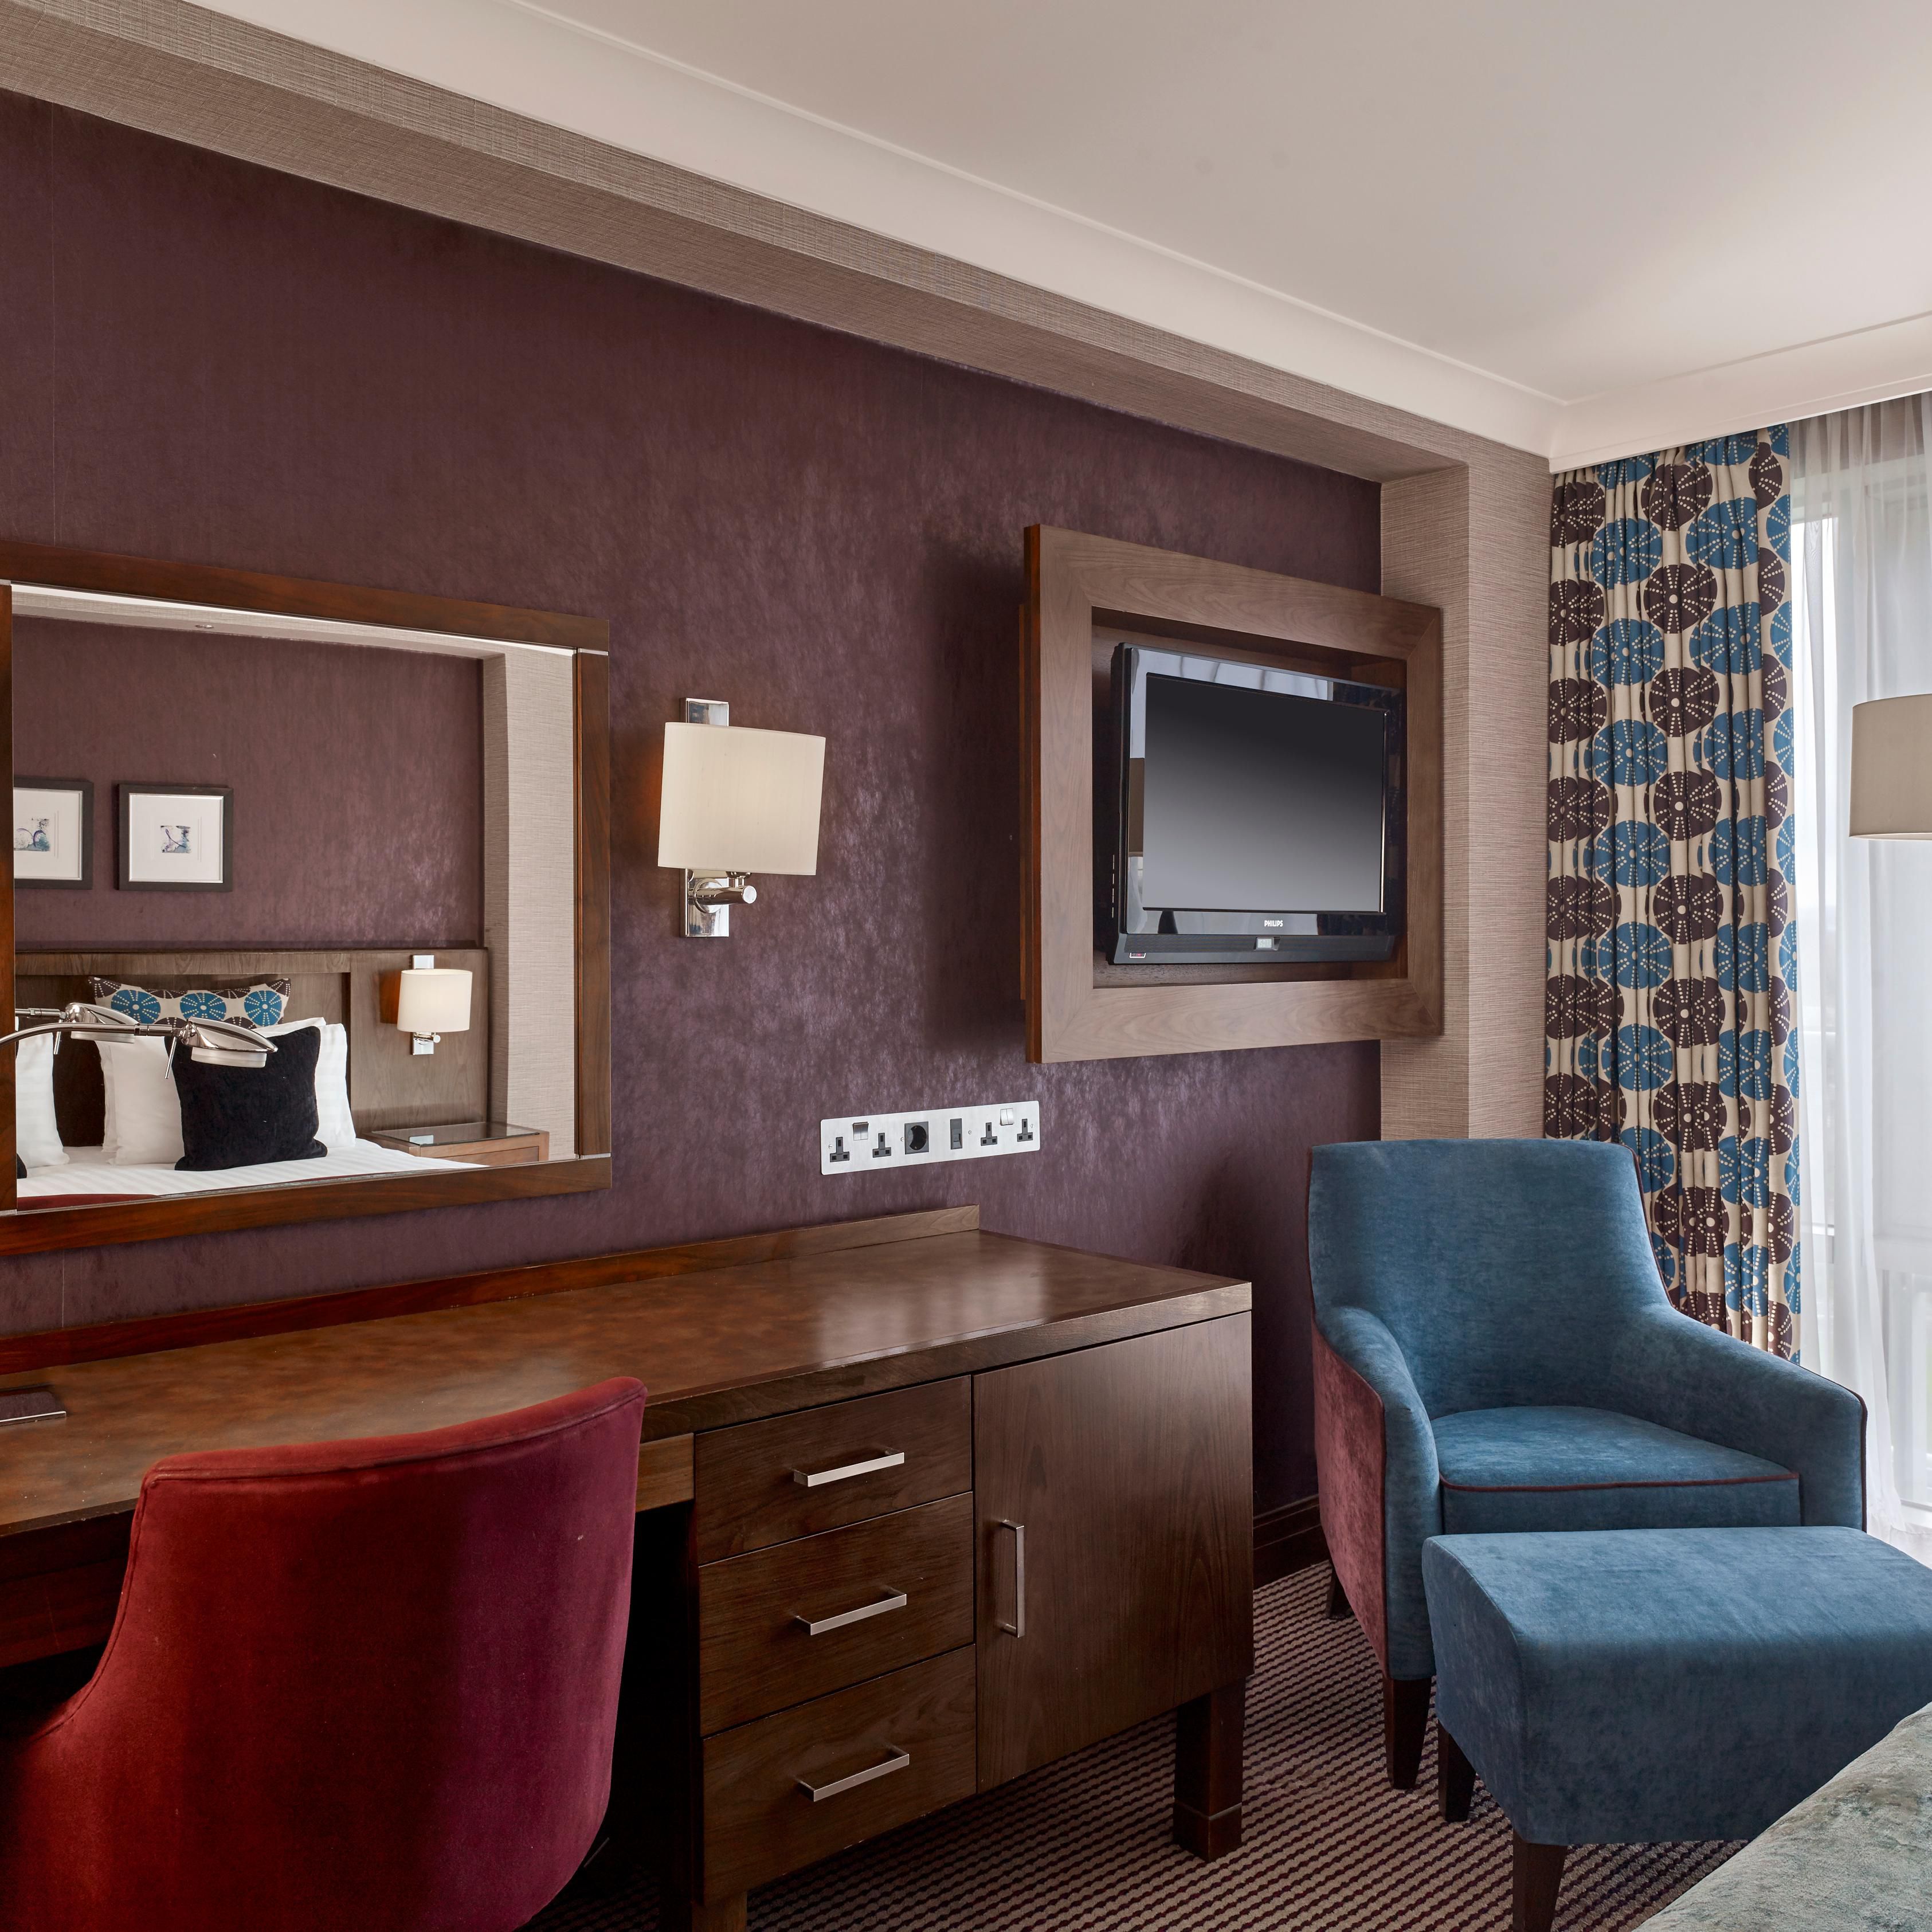 Plenty of space to work in peace in the comfort of your Club room